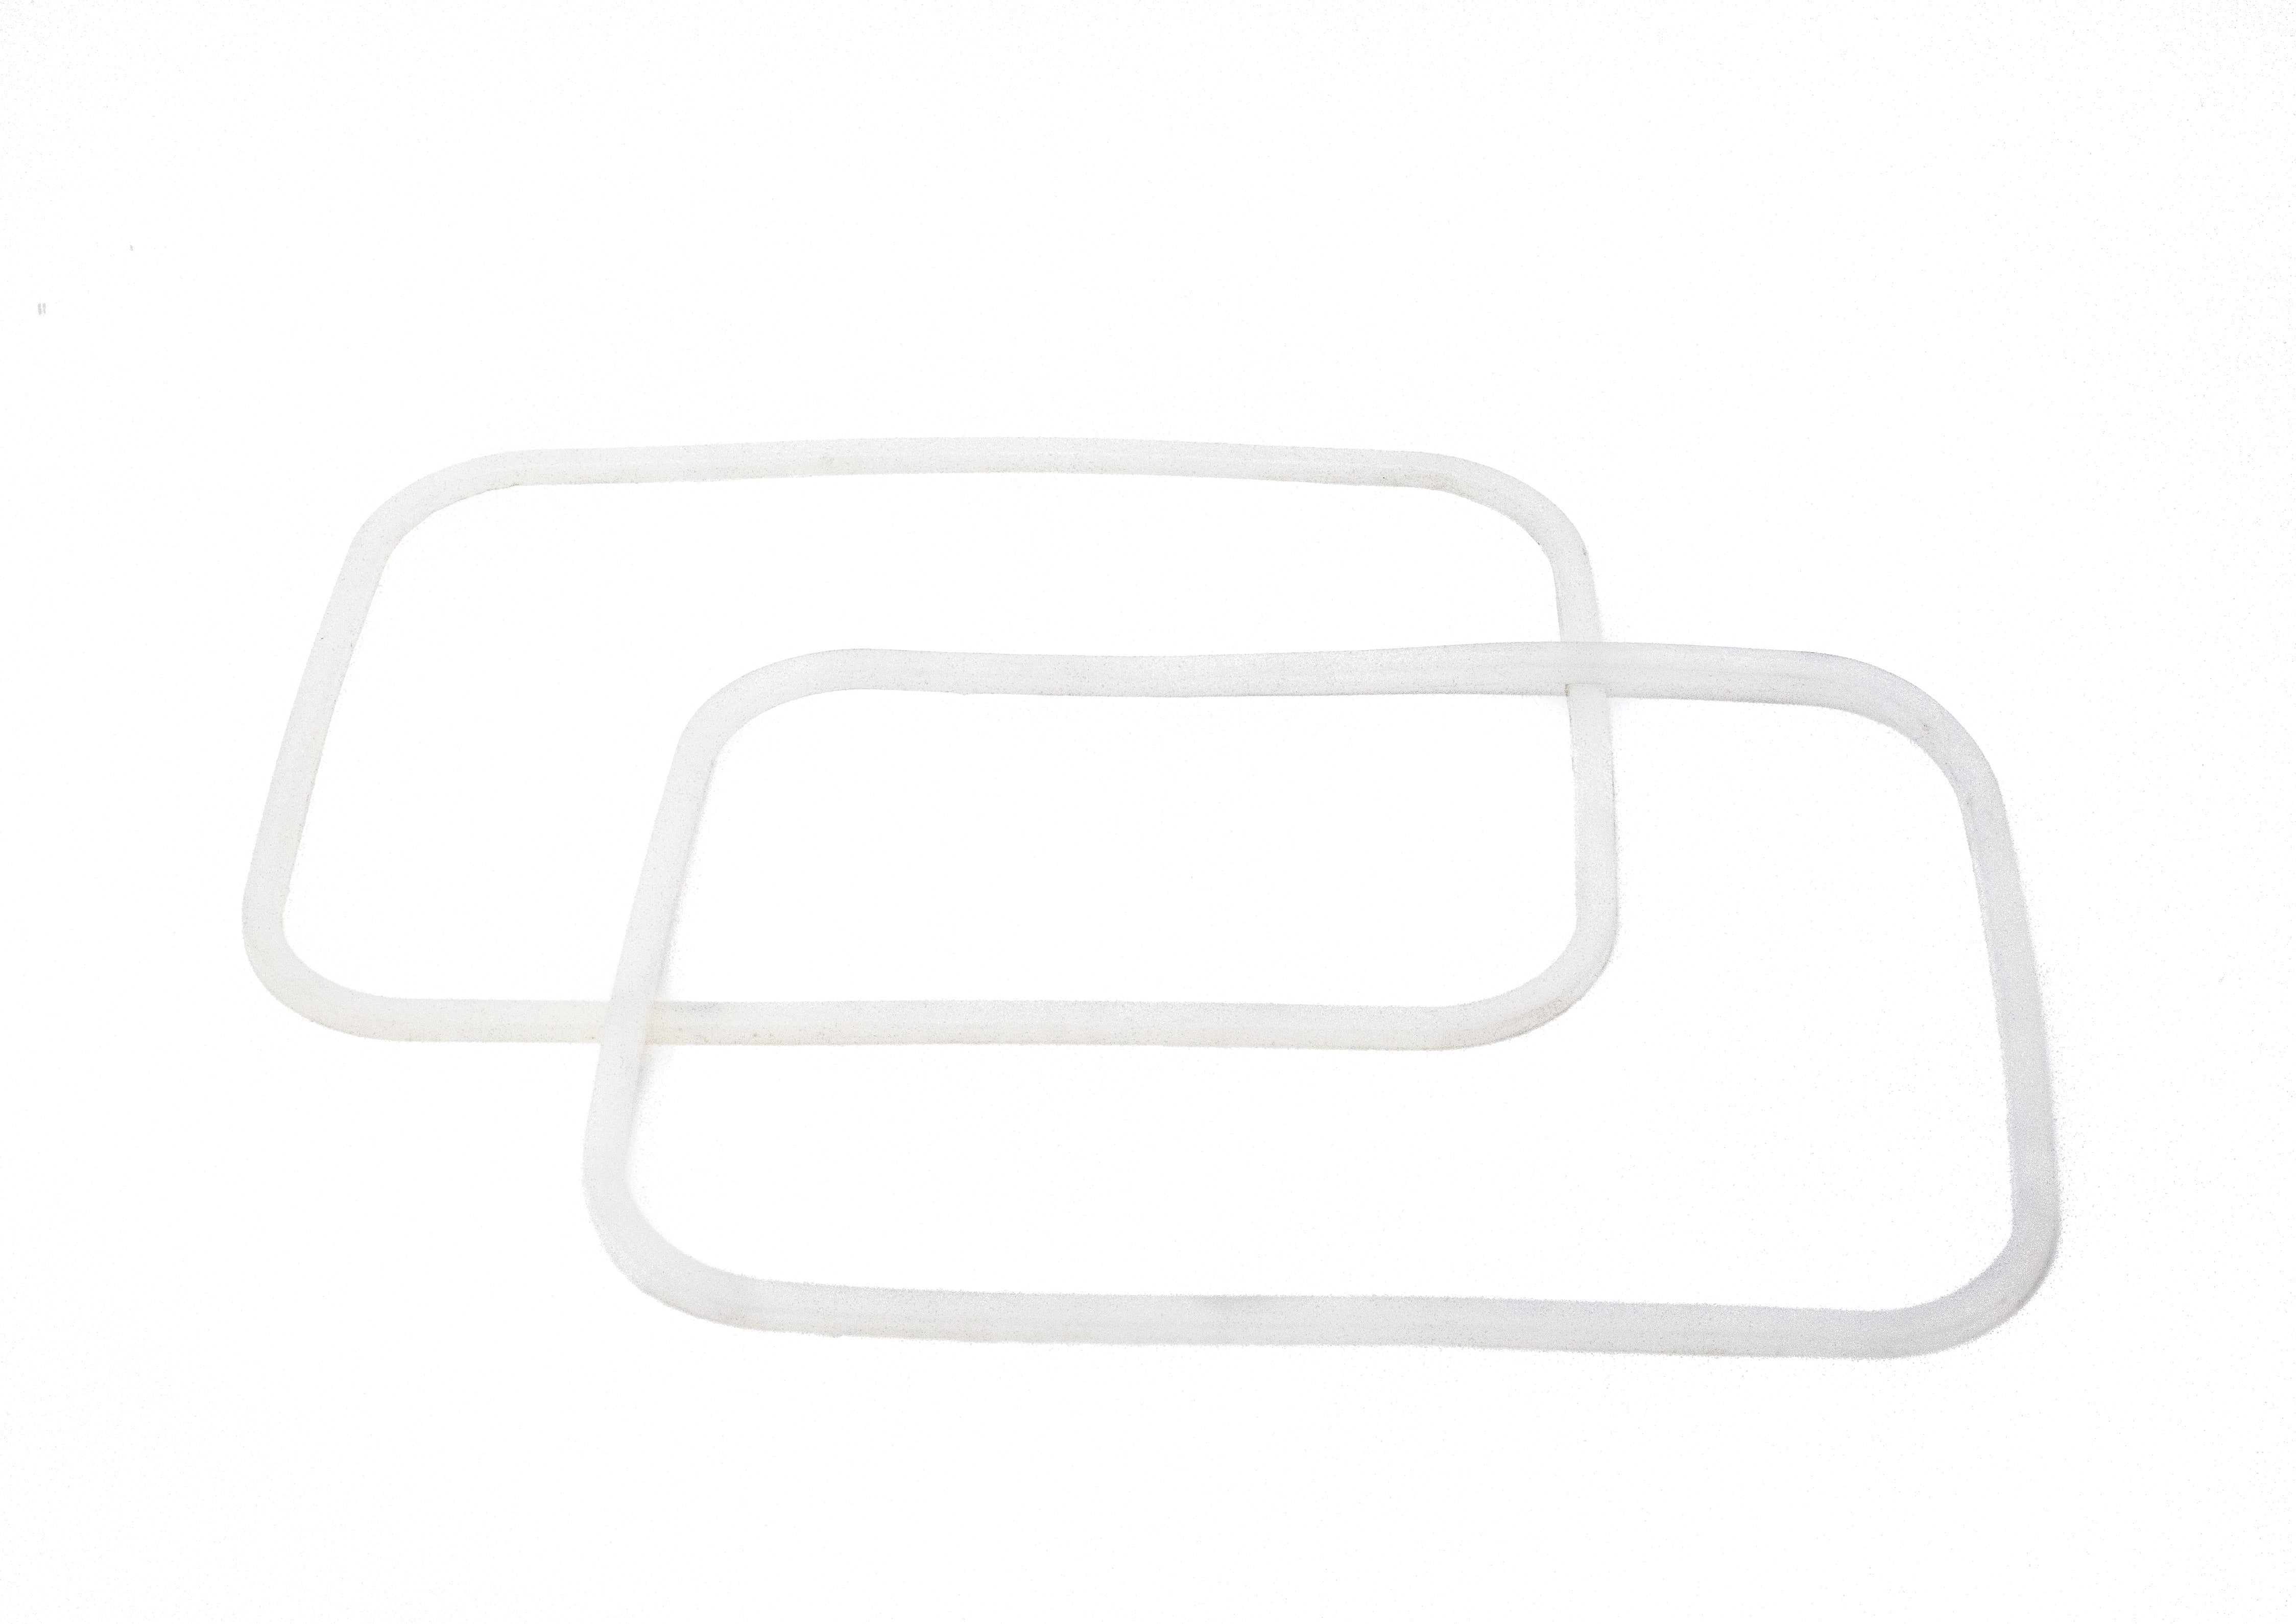 Silicone Seals, Set of 2 for Larger Lid Lunch Boxes